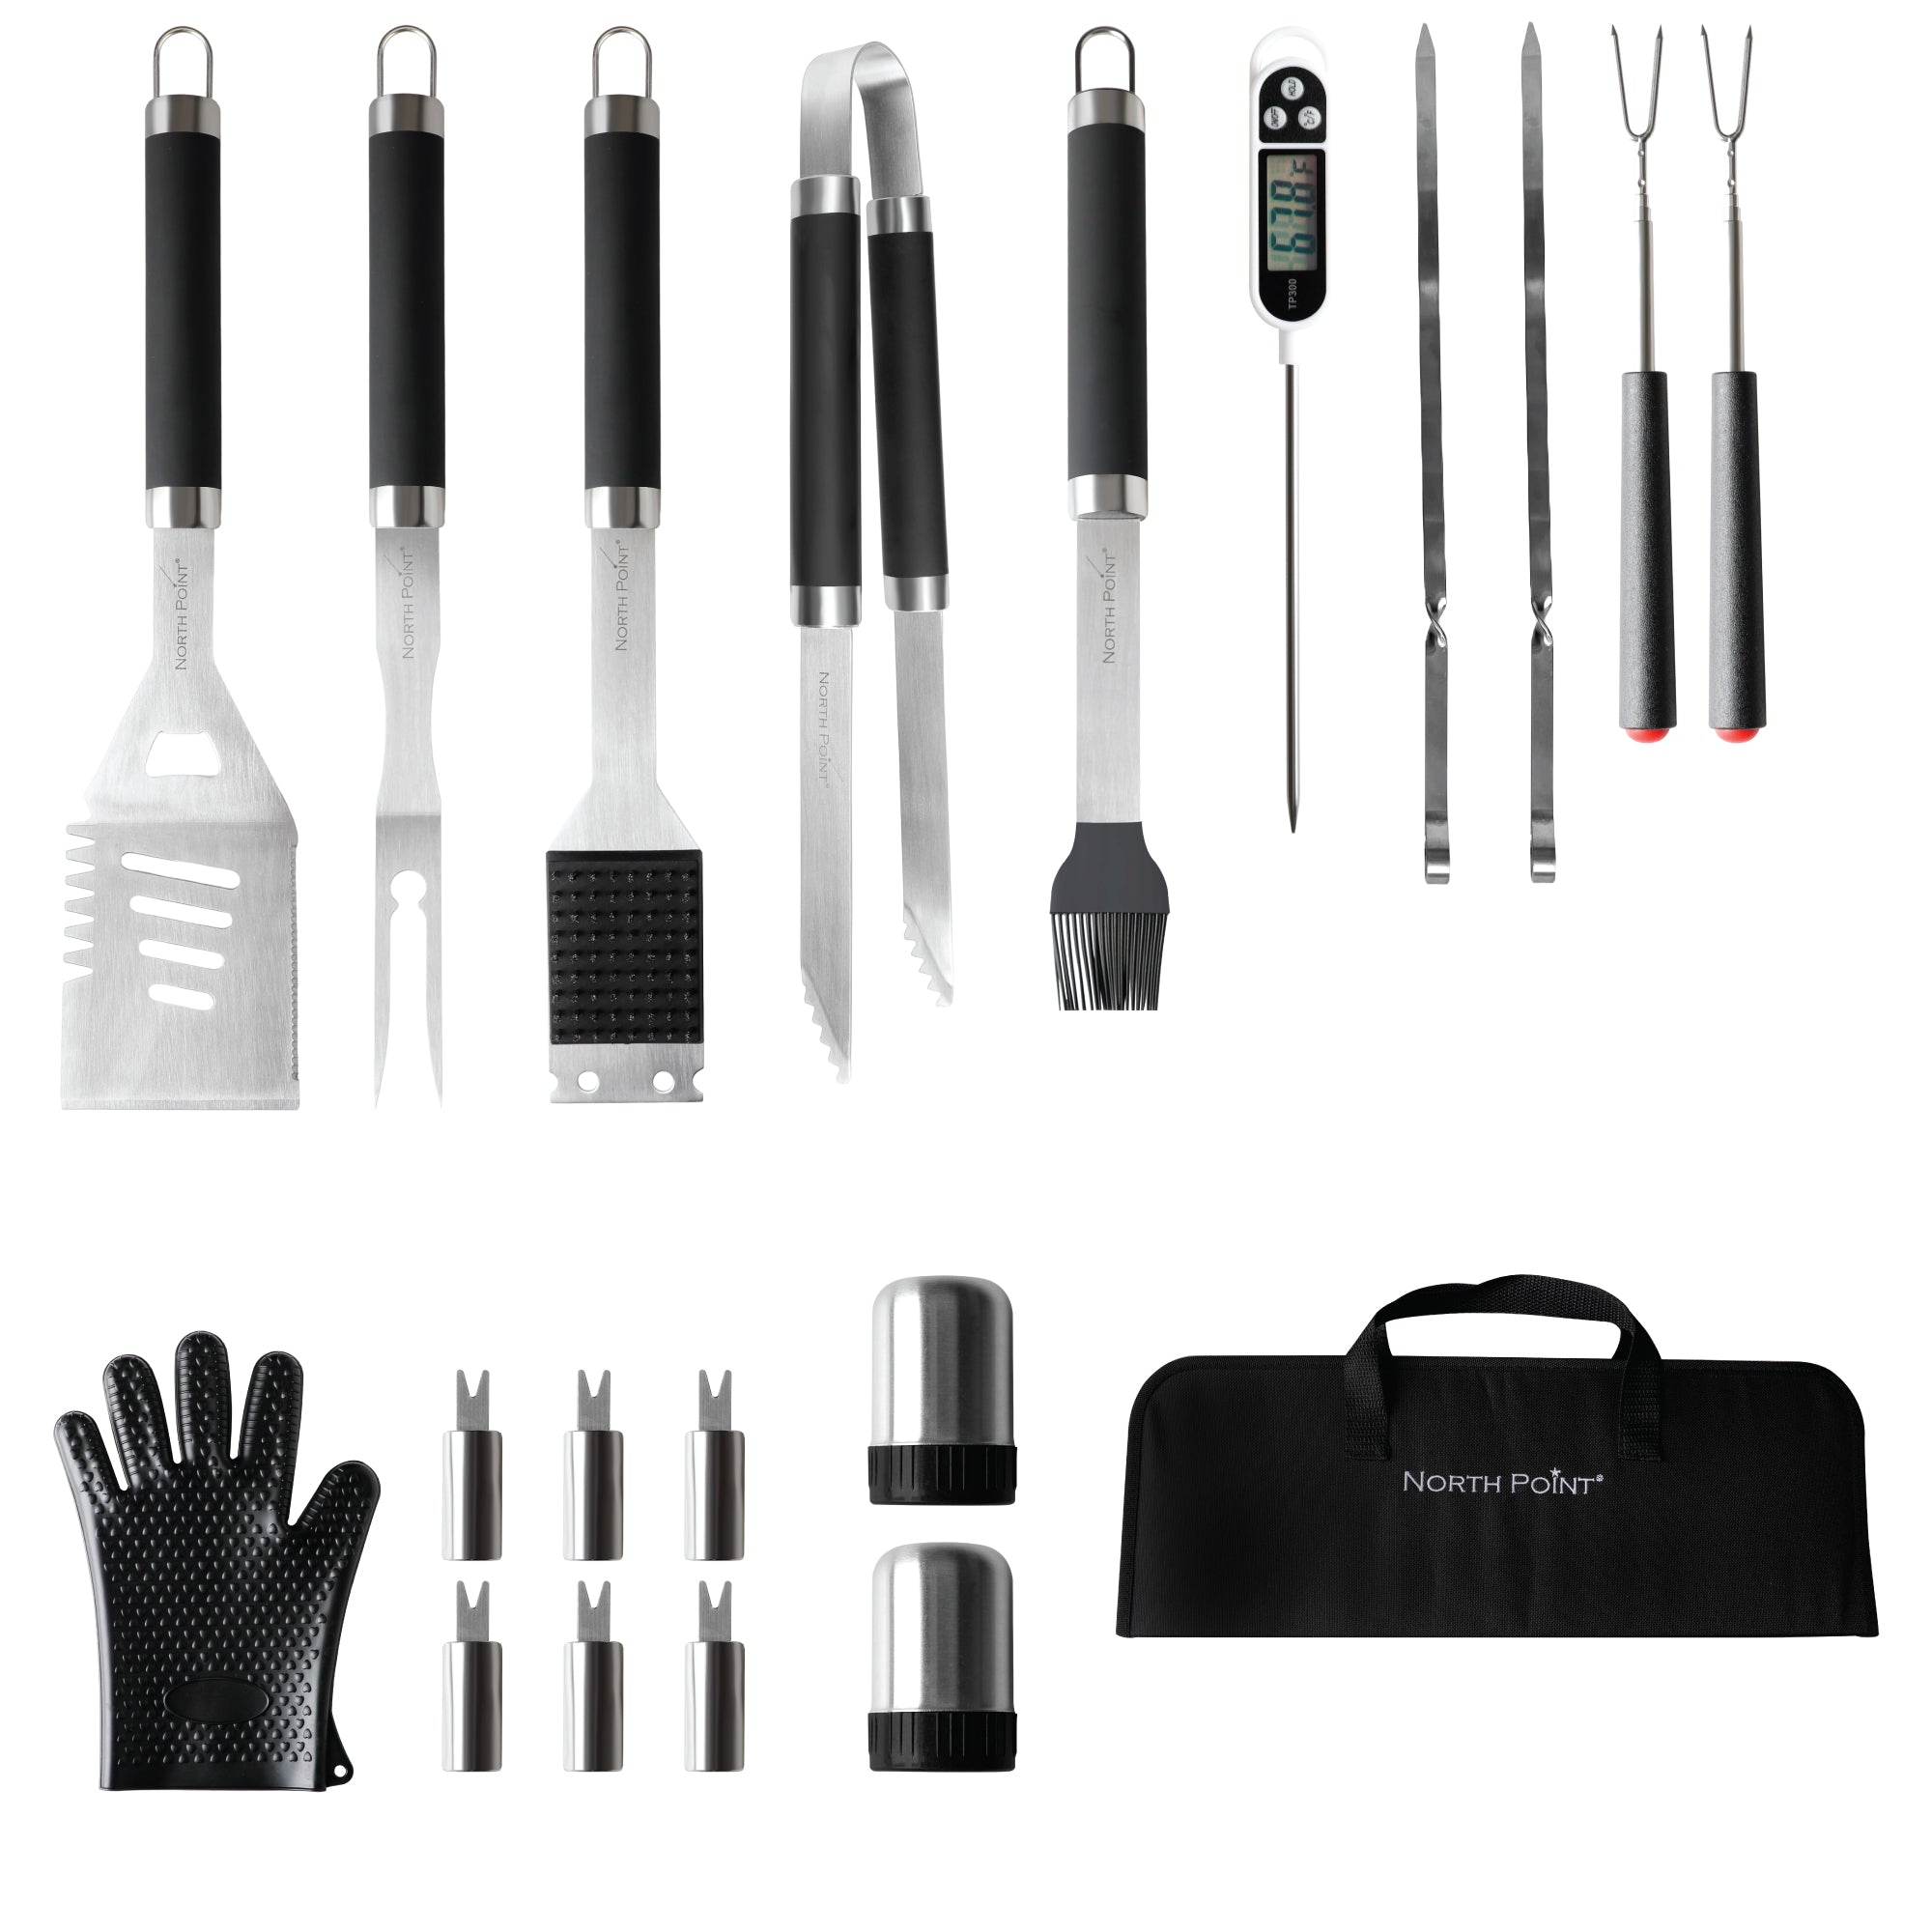       NORTH POINT® 20 PIECE BBQ TOOL SET AND CARRY CASE – North Point®